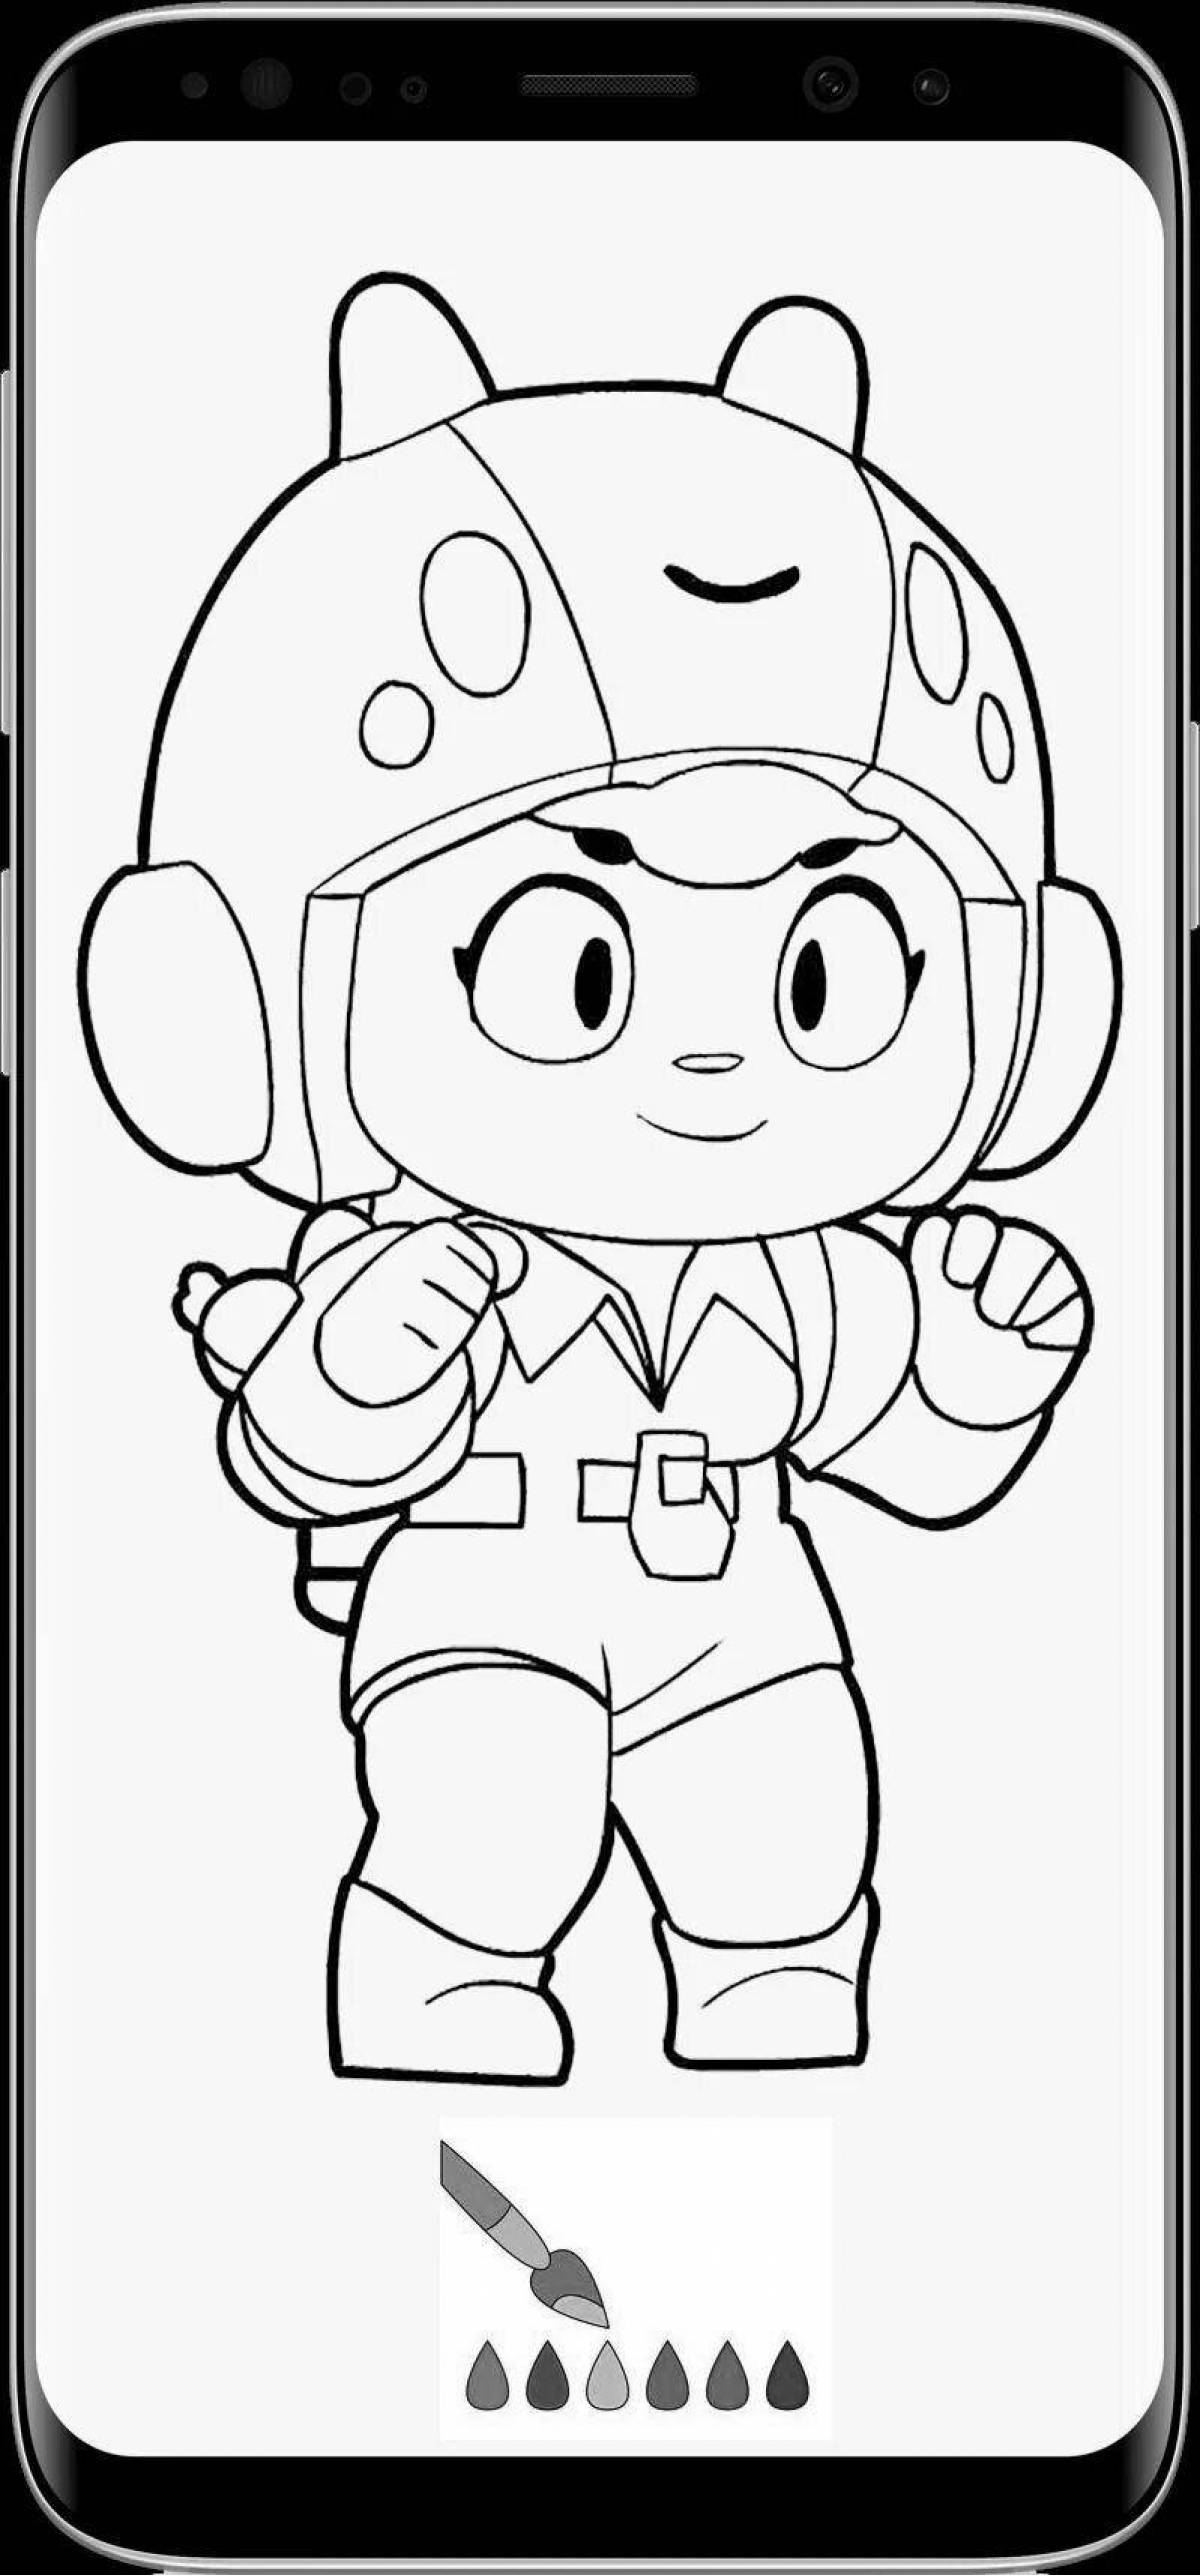 Charming brawl stars coloring by numbers